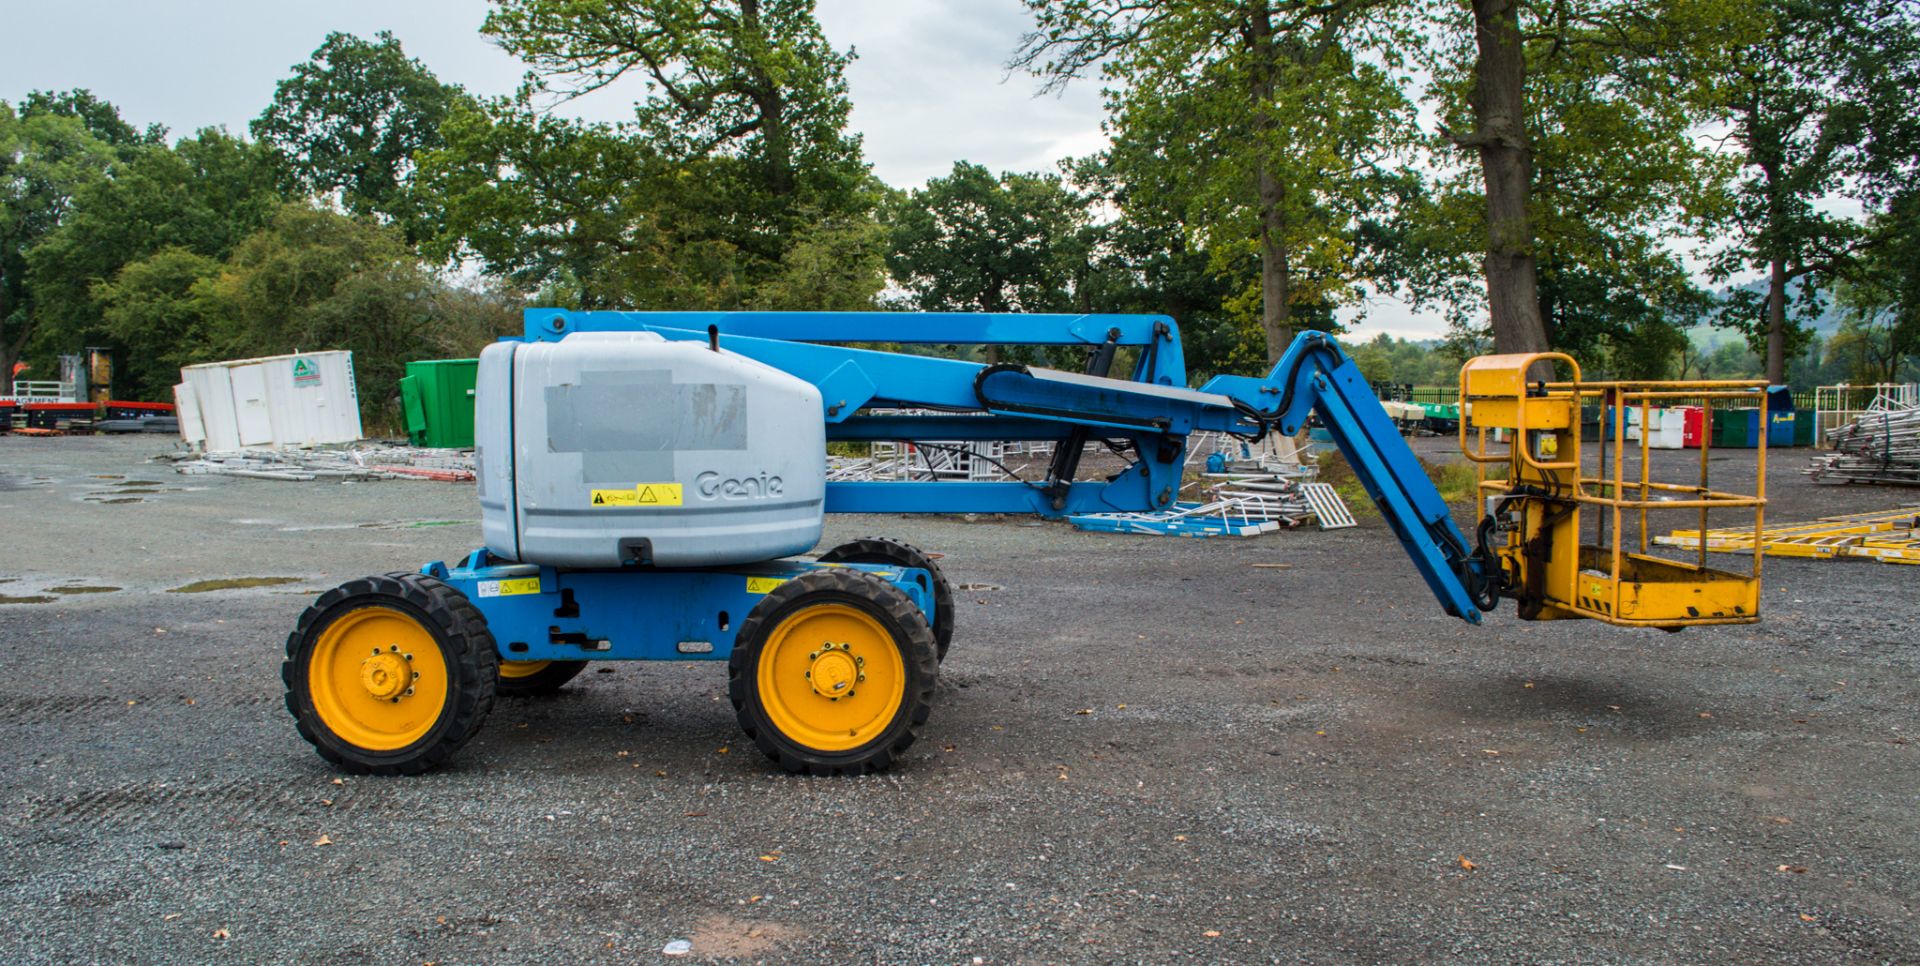 Genie Z-45/25 45 foot diesel driven 4WD articulated boom lift Year: 2011 S/N: 11B-1672 Recorded - Image 6 of 15